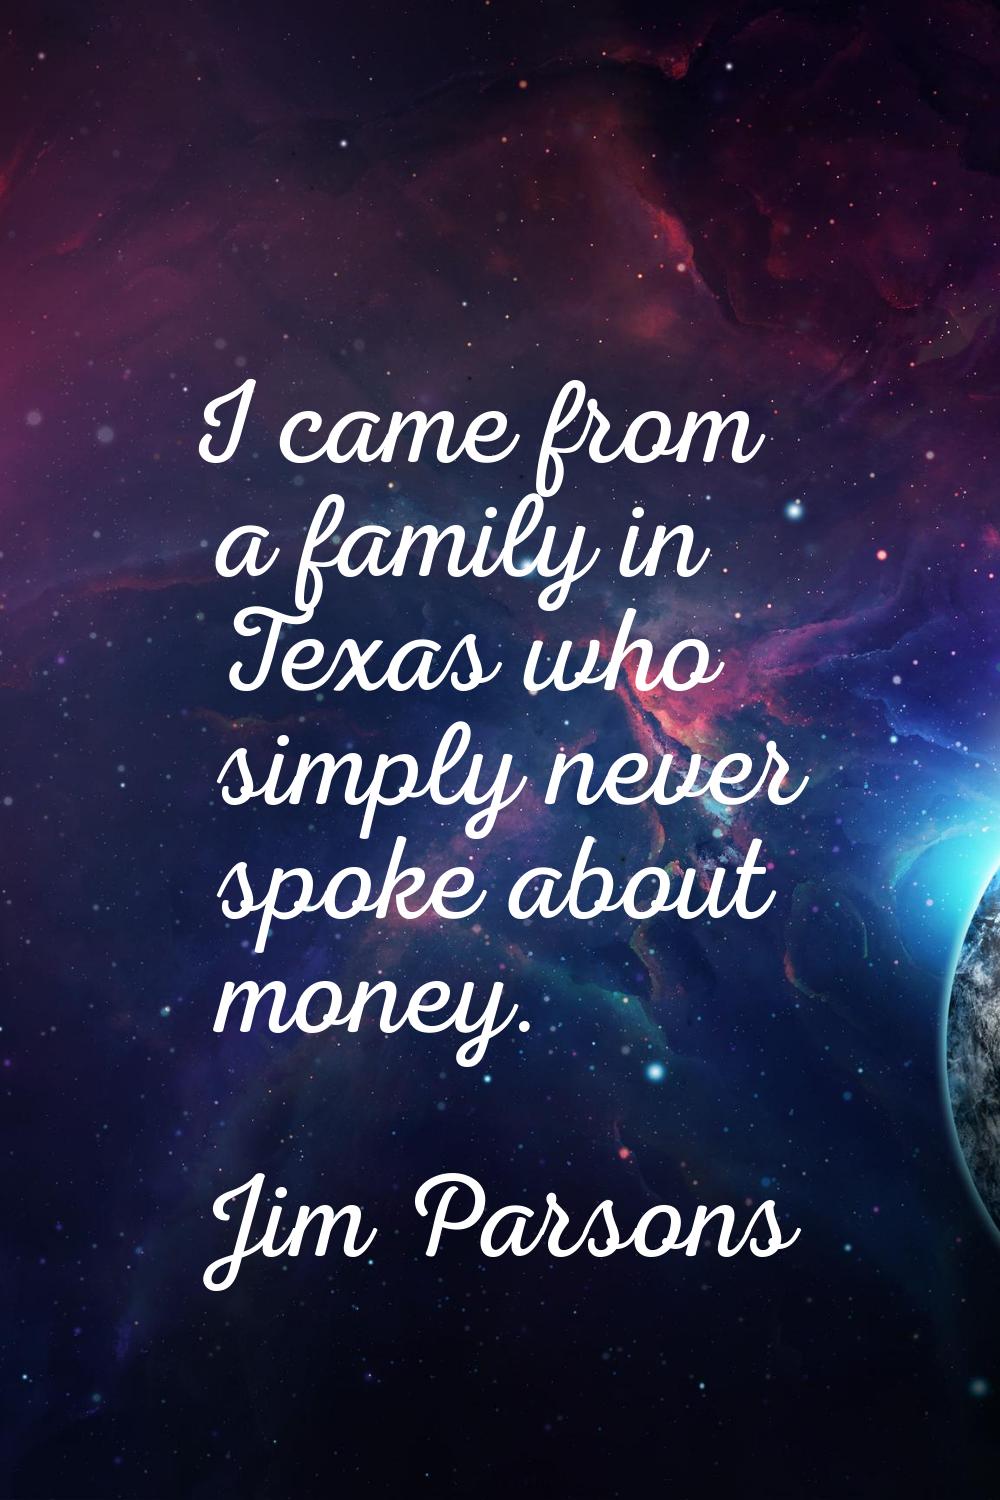 I came from a family in Texas who simply never spoke about money.